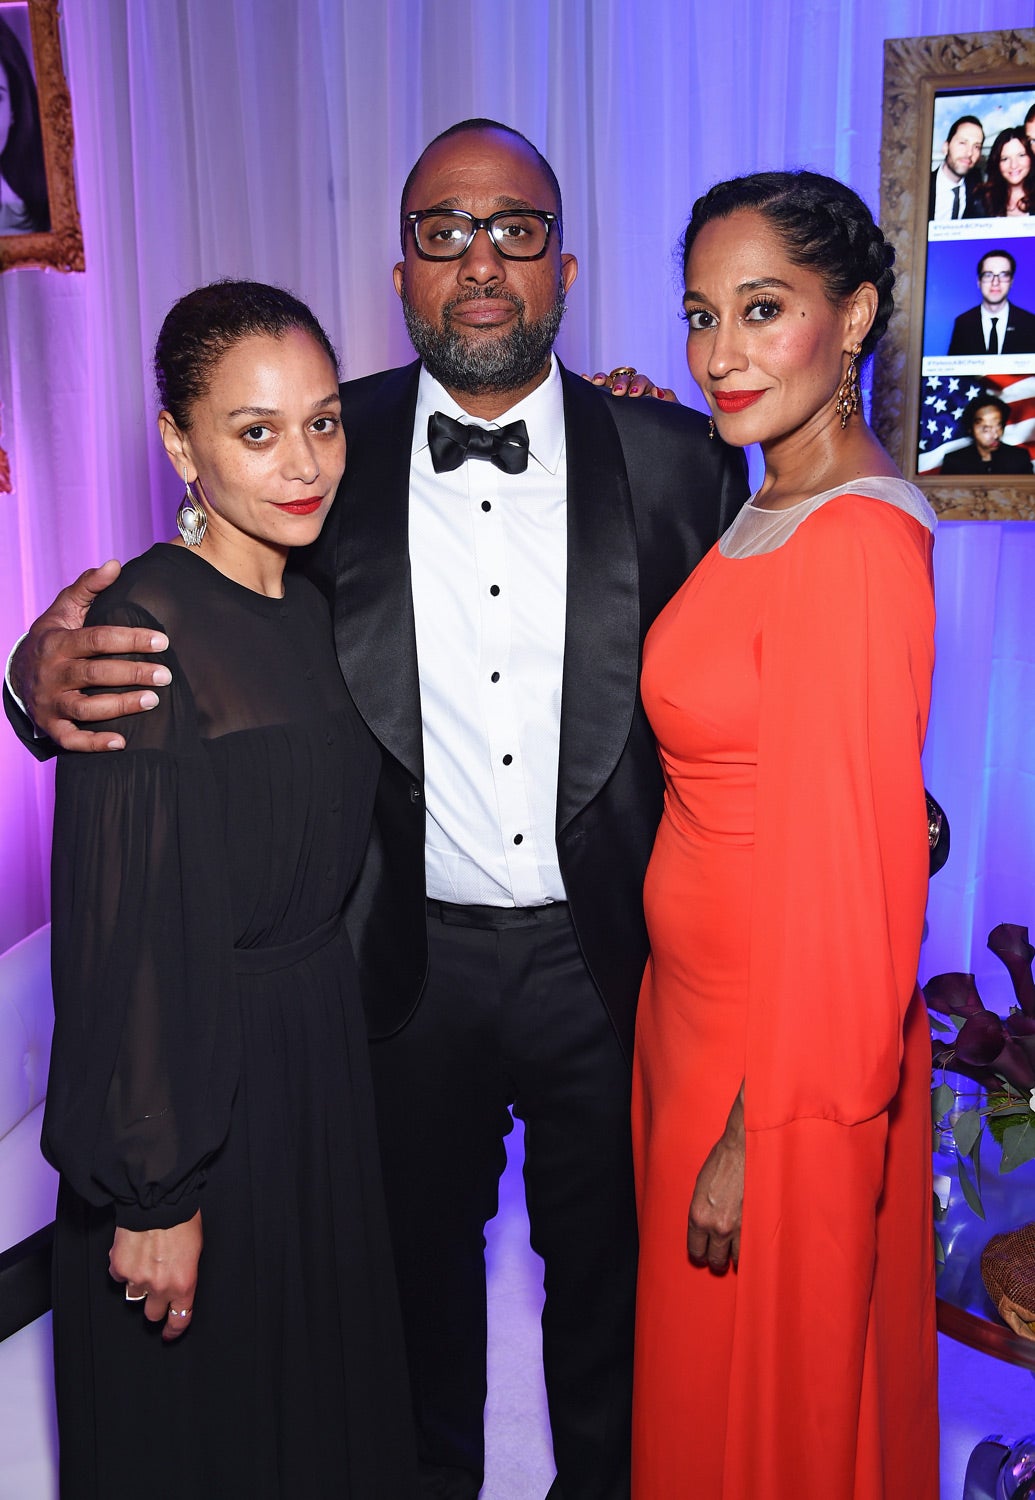 Celebrities at the 2015 White House Correspondents Dinner